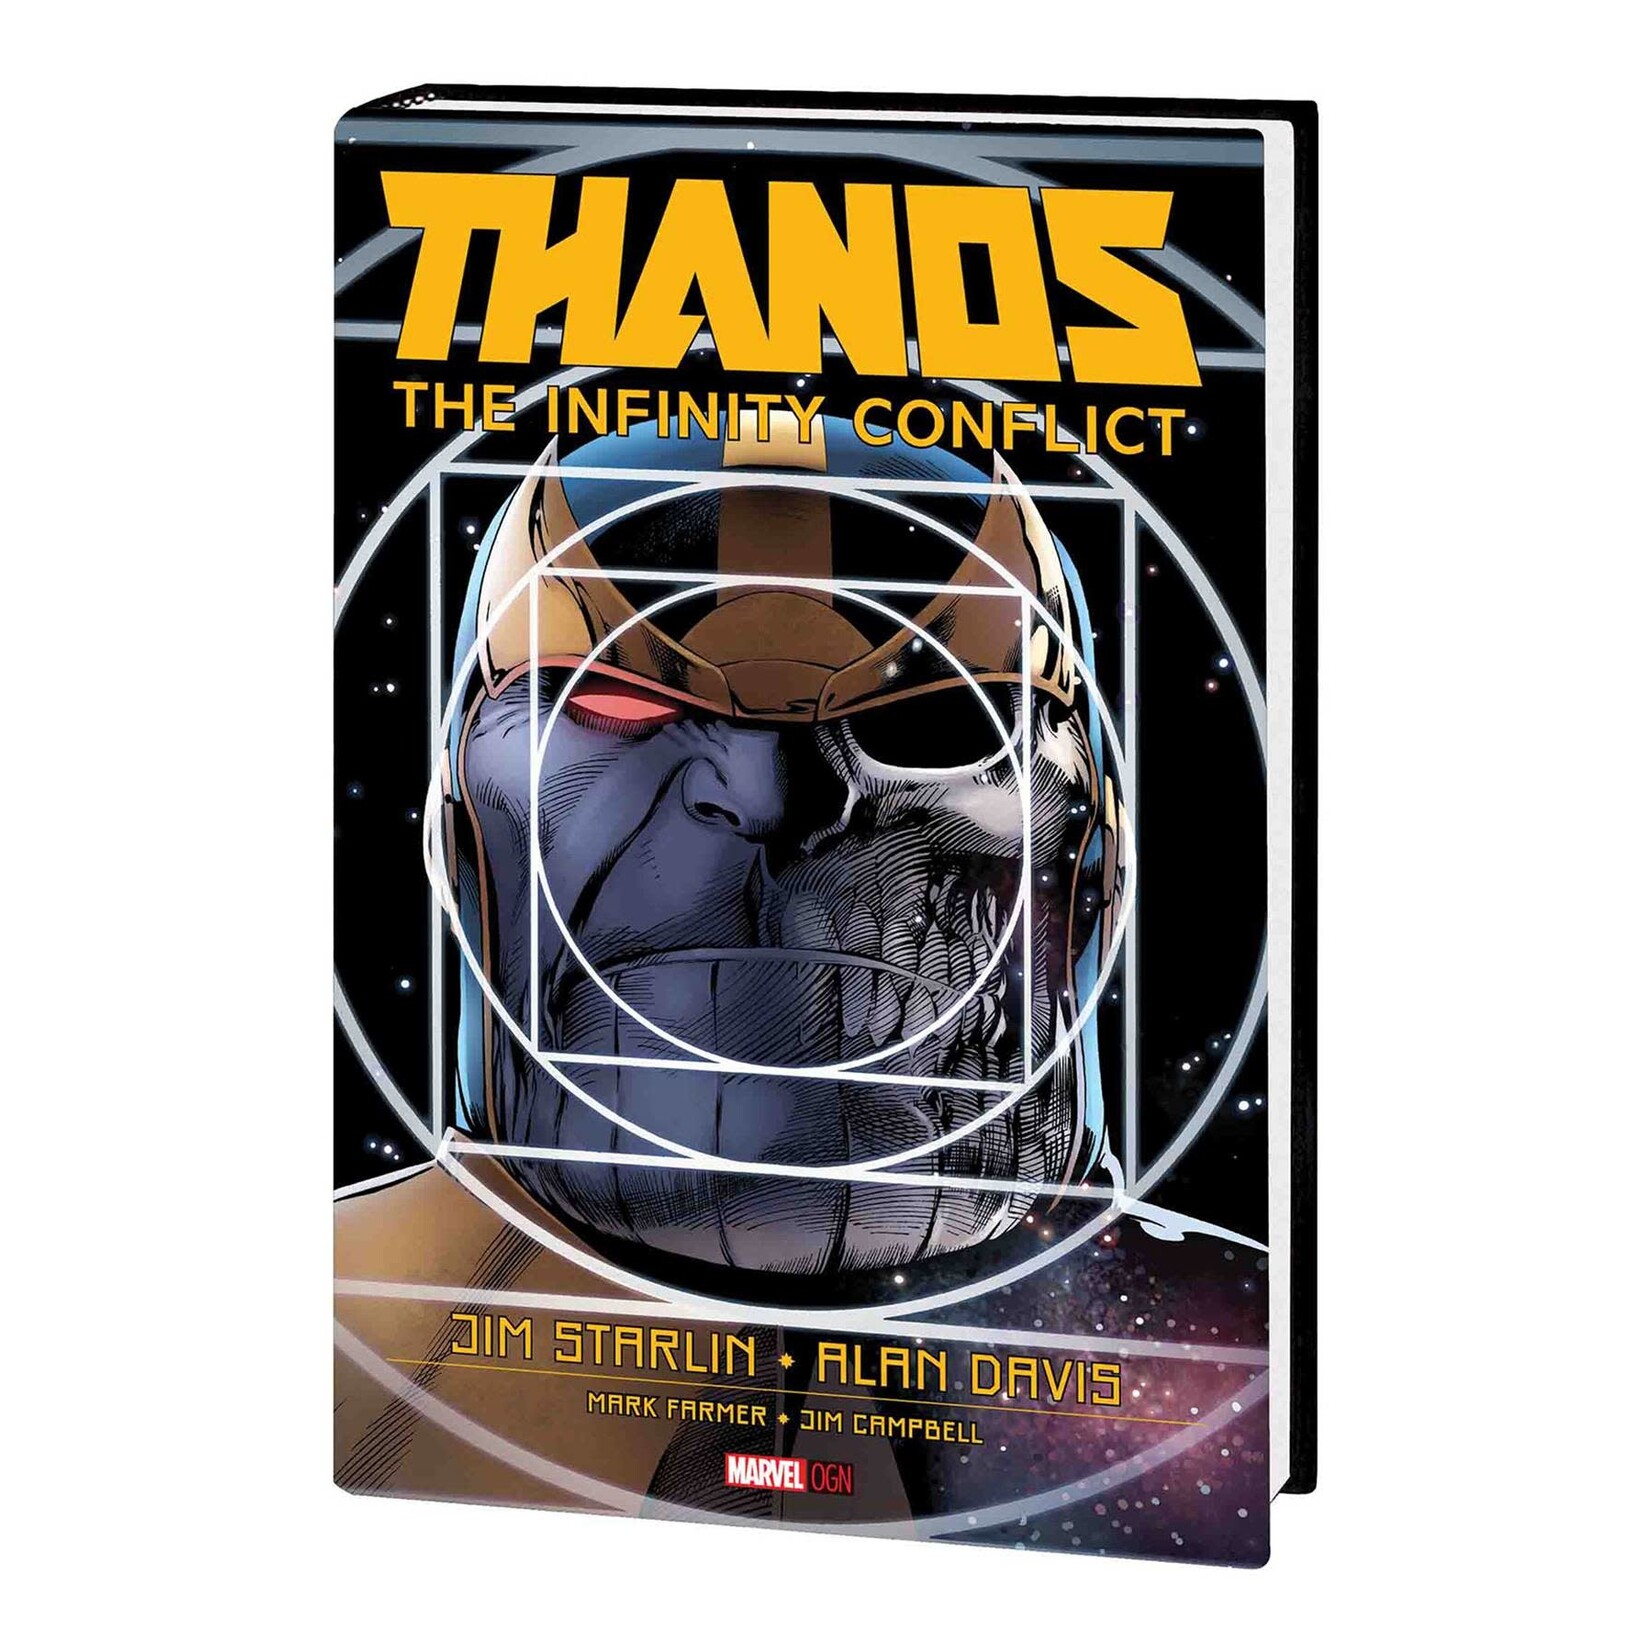 Hard Cover - Thanos The Infinity Conflict